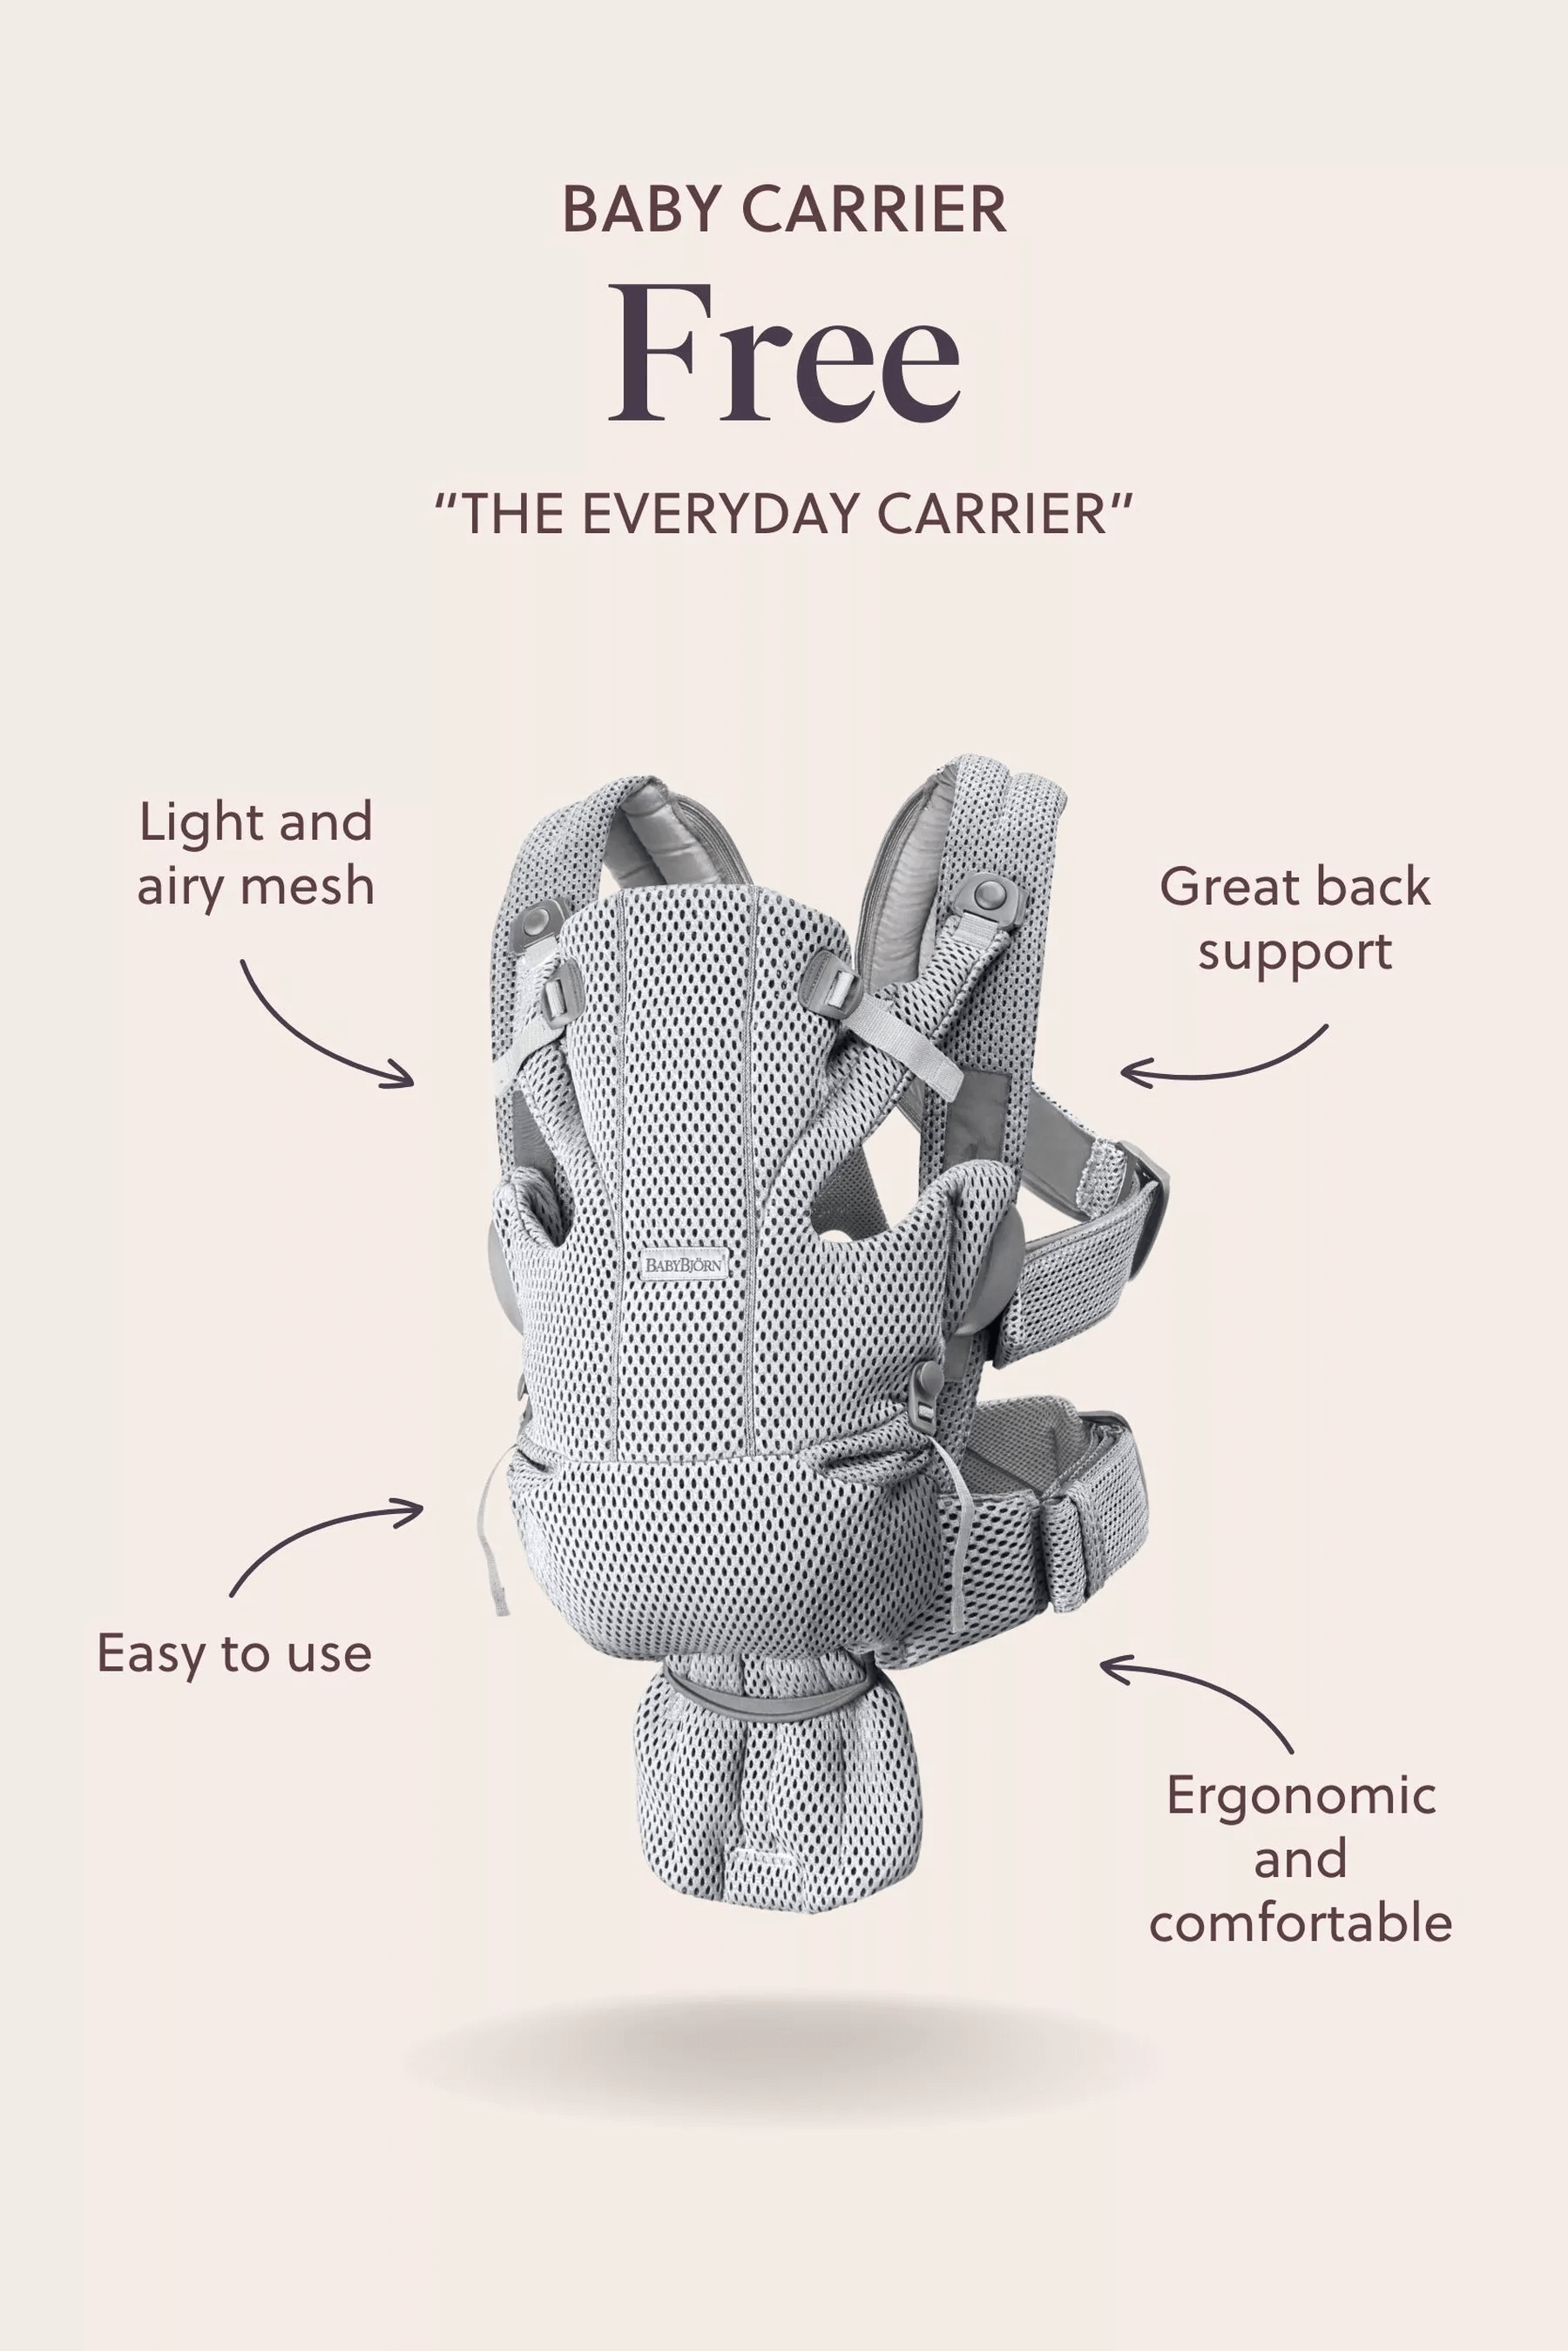 Baby Carrier Free Product Highlights